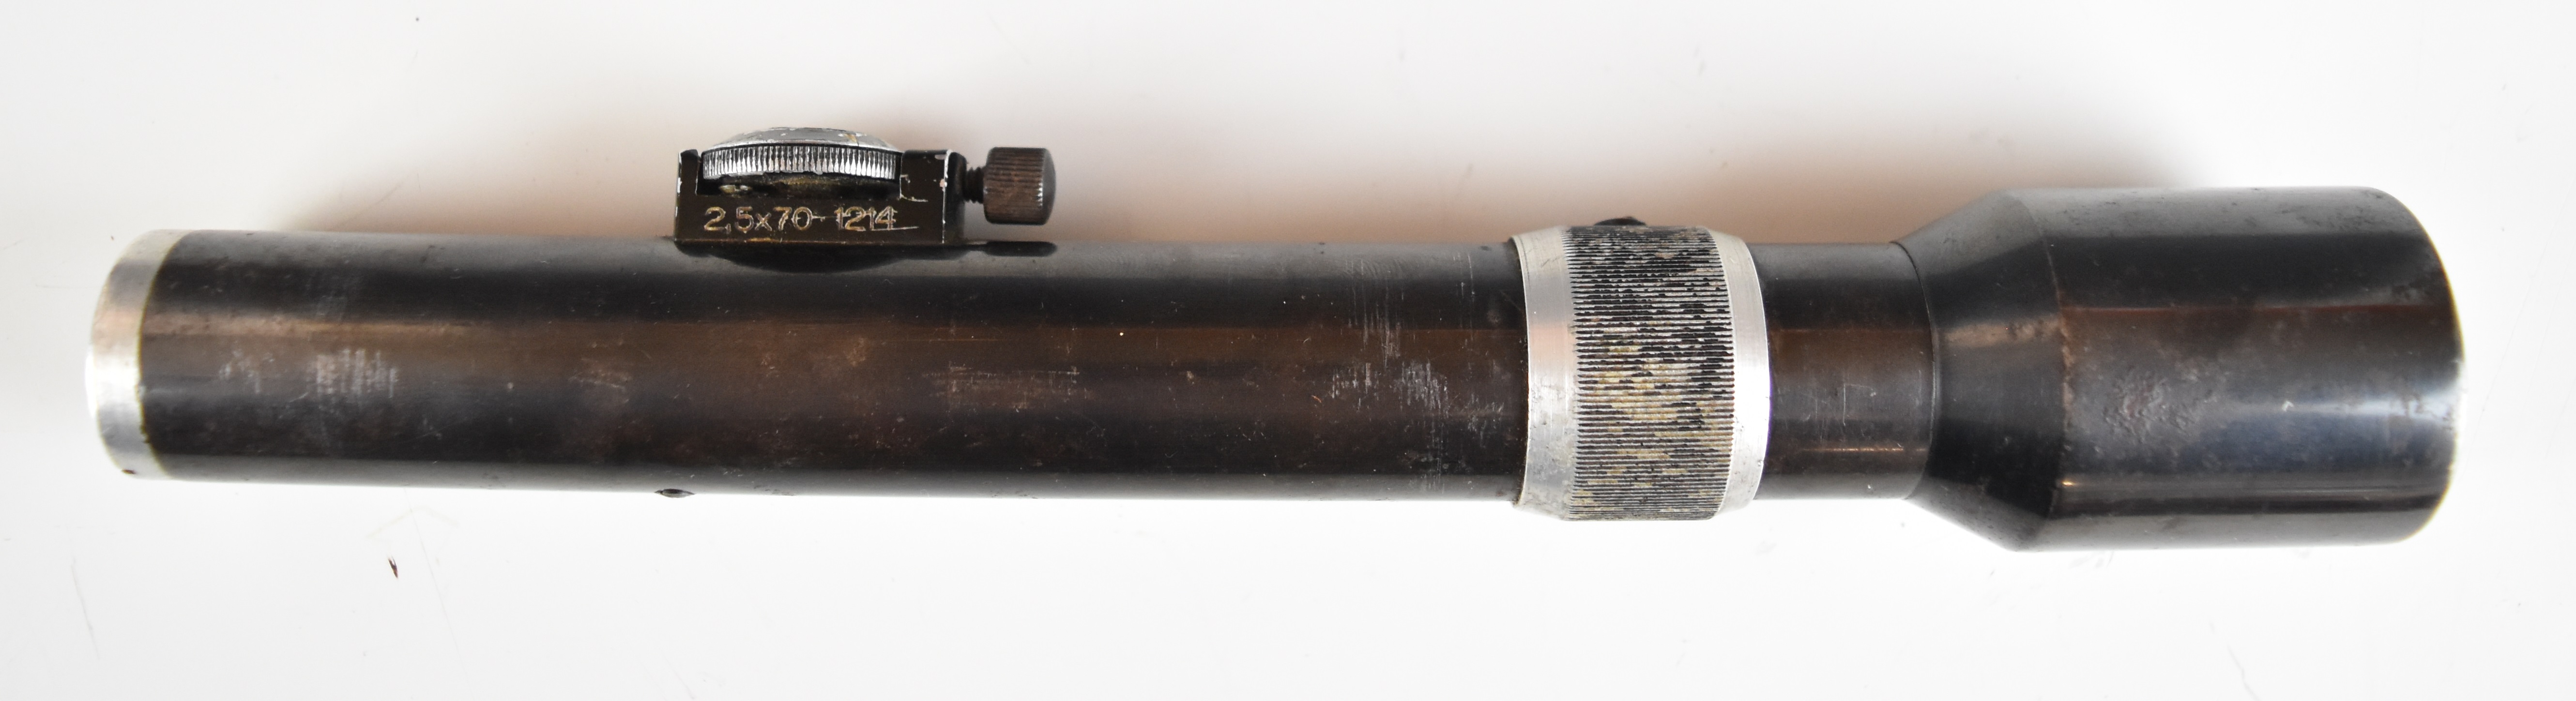 Ajax 2.5x70 German sniper rifle scope marked '1214' and 'Ajax Germany', in leather case - Image 2 of 6